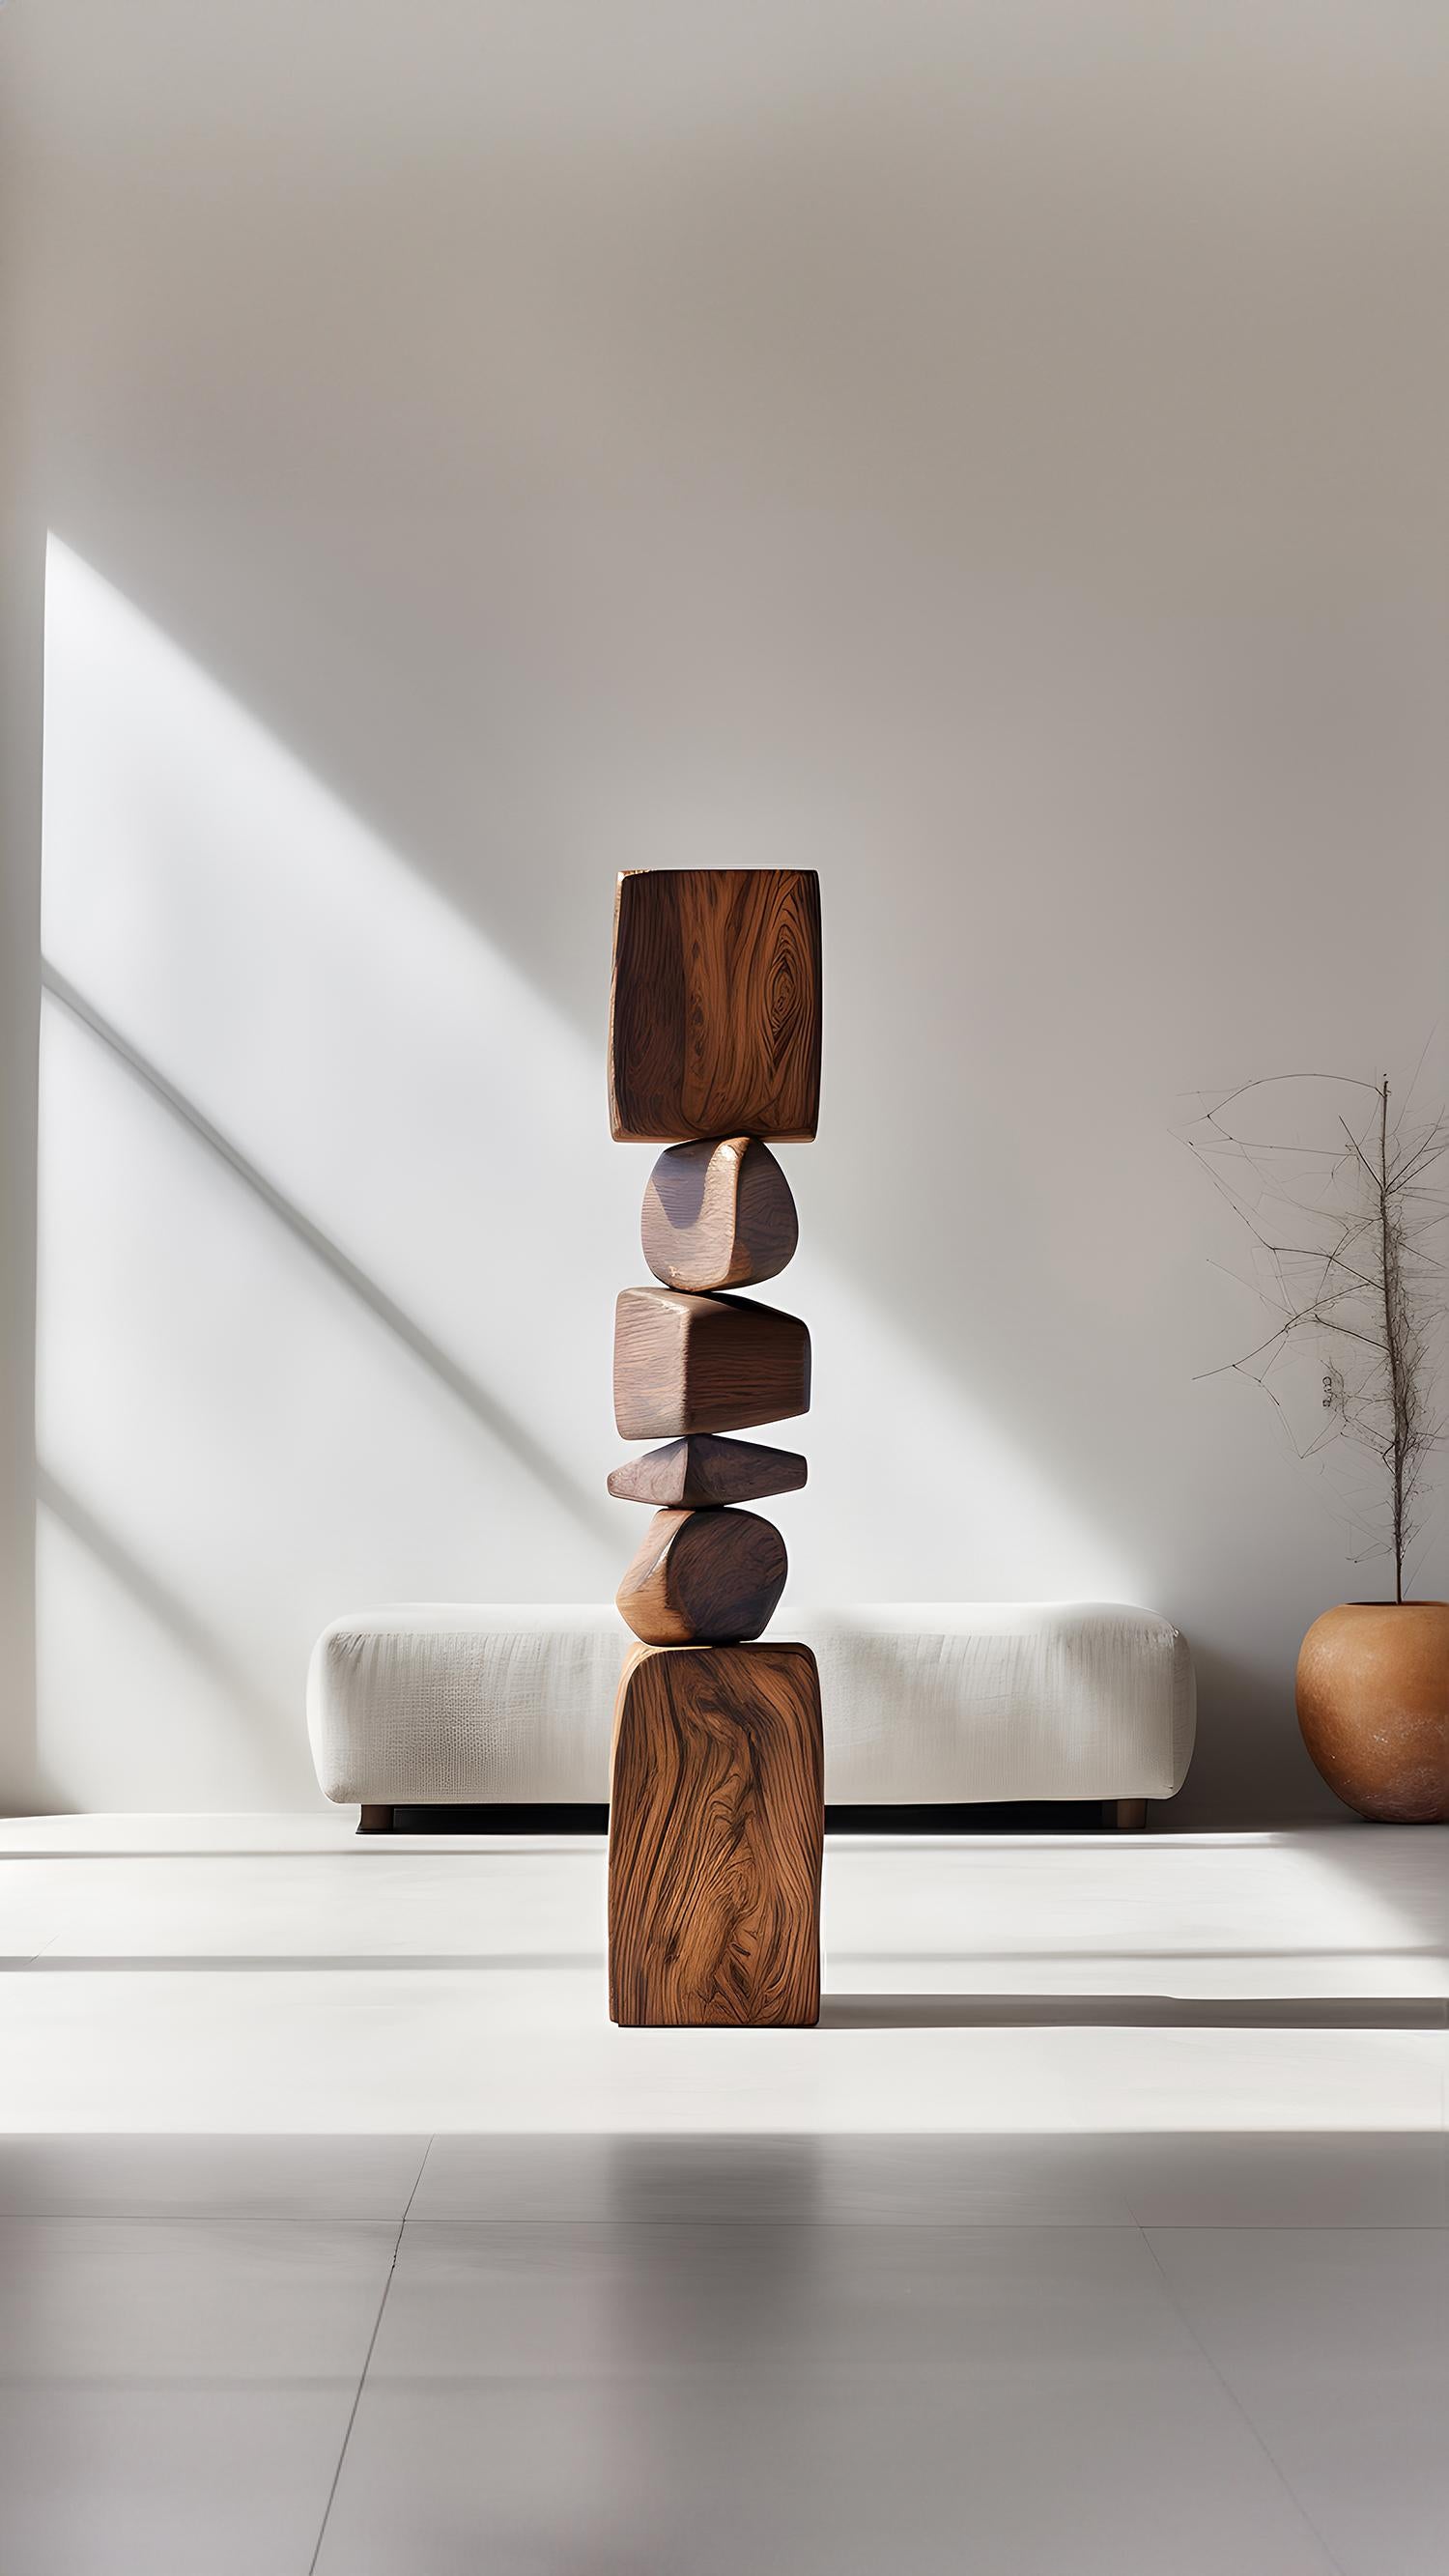 Hand-Crafted Exquisite Wooden Standing Totem Still Stand No35 by NONO, Joel Escalona Art For Sale